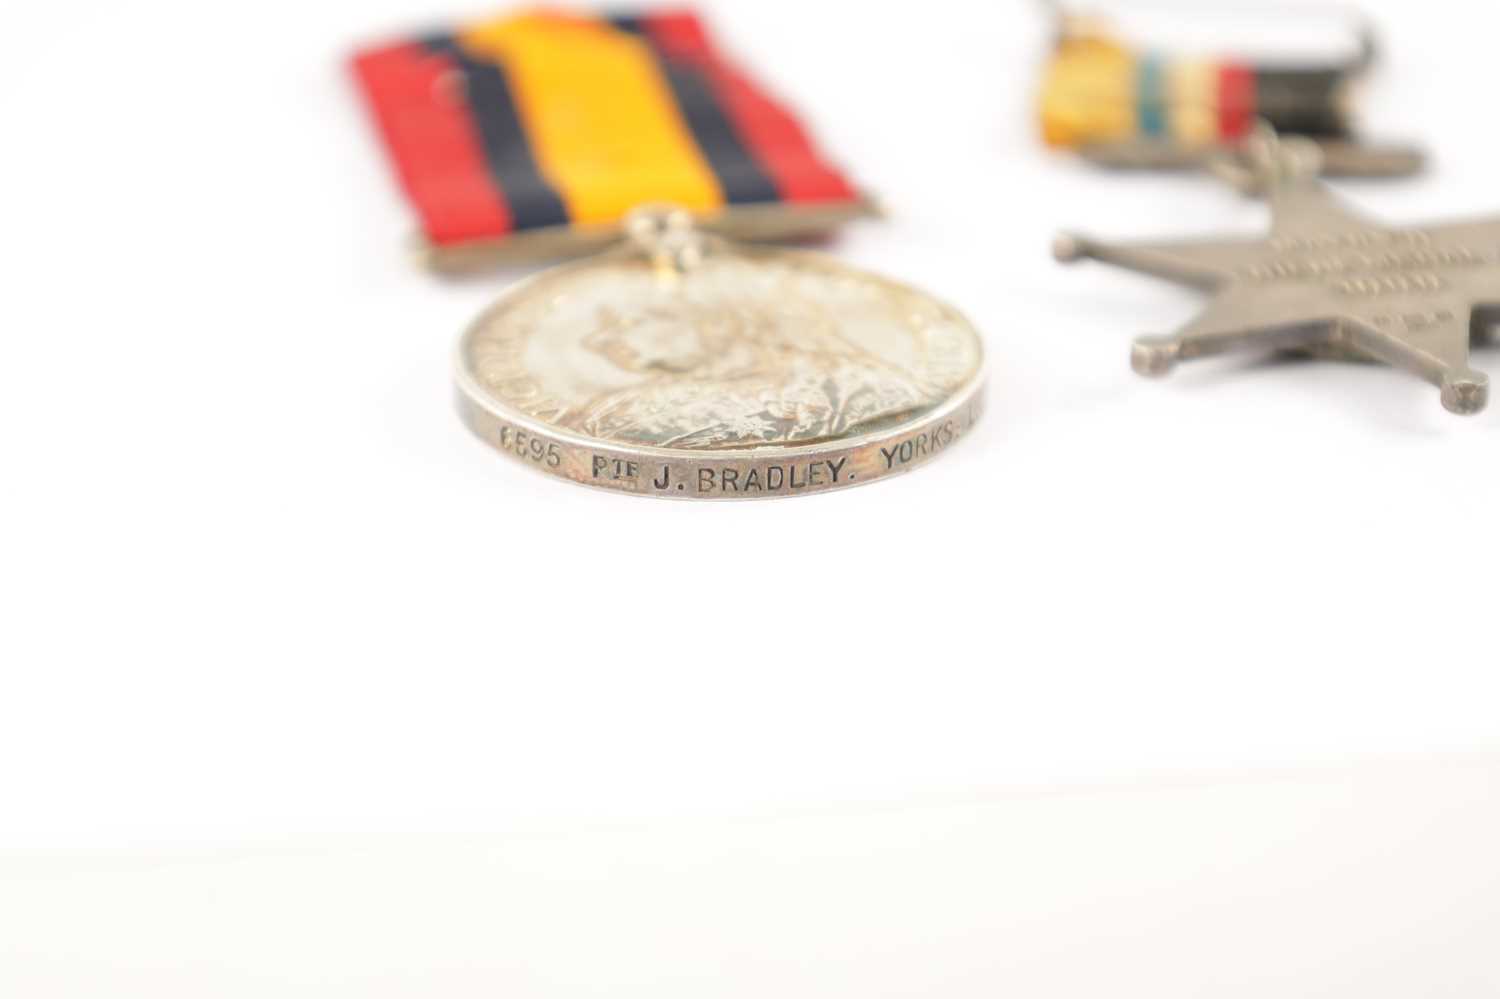 A SILVER KIMBERLEY STAR MEDAL AND A QUEENS SOUTH AFRICAN MEDAL - Image 9 of 9